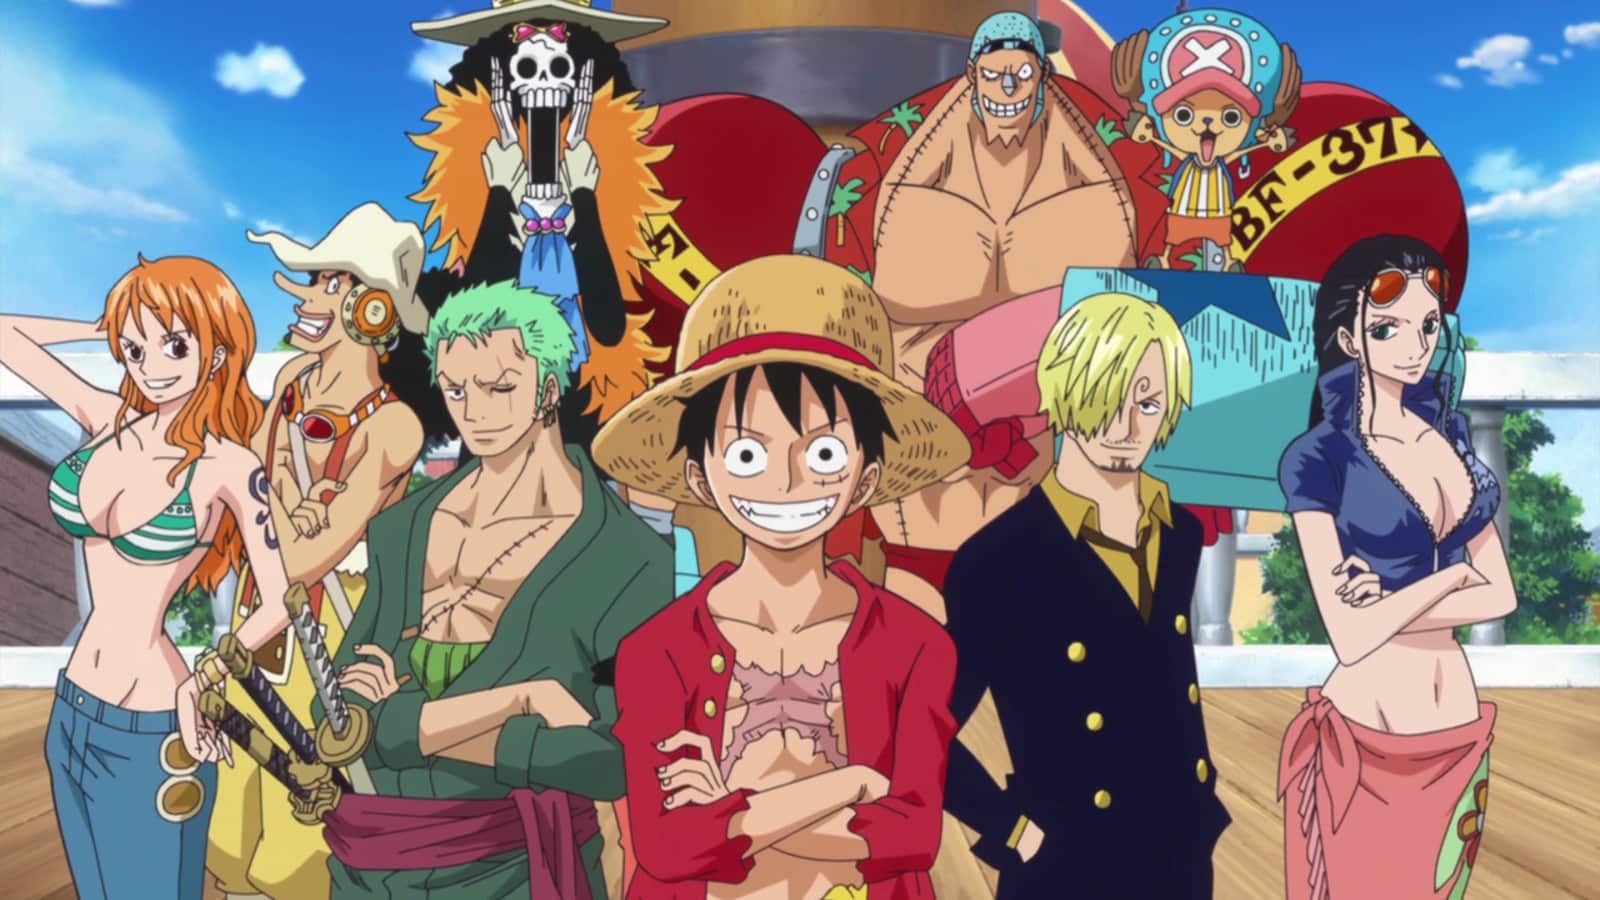 The cast and characters of the One Piece anime standing together and smiling